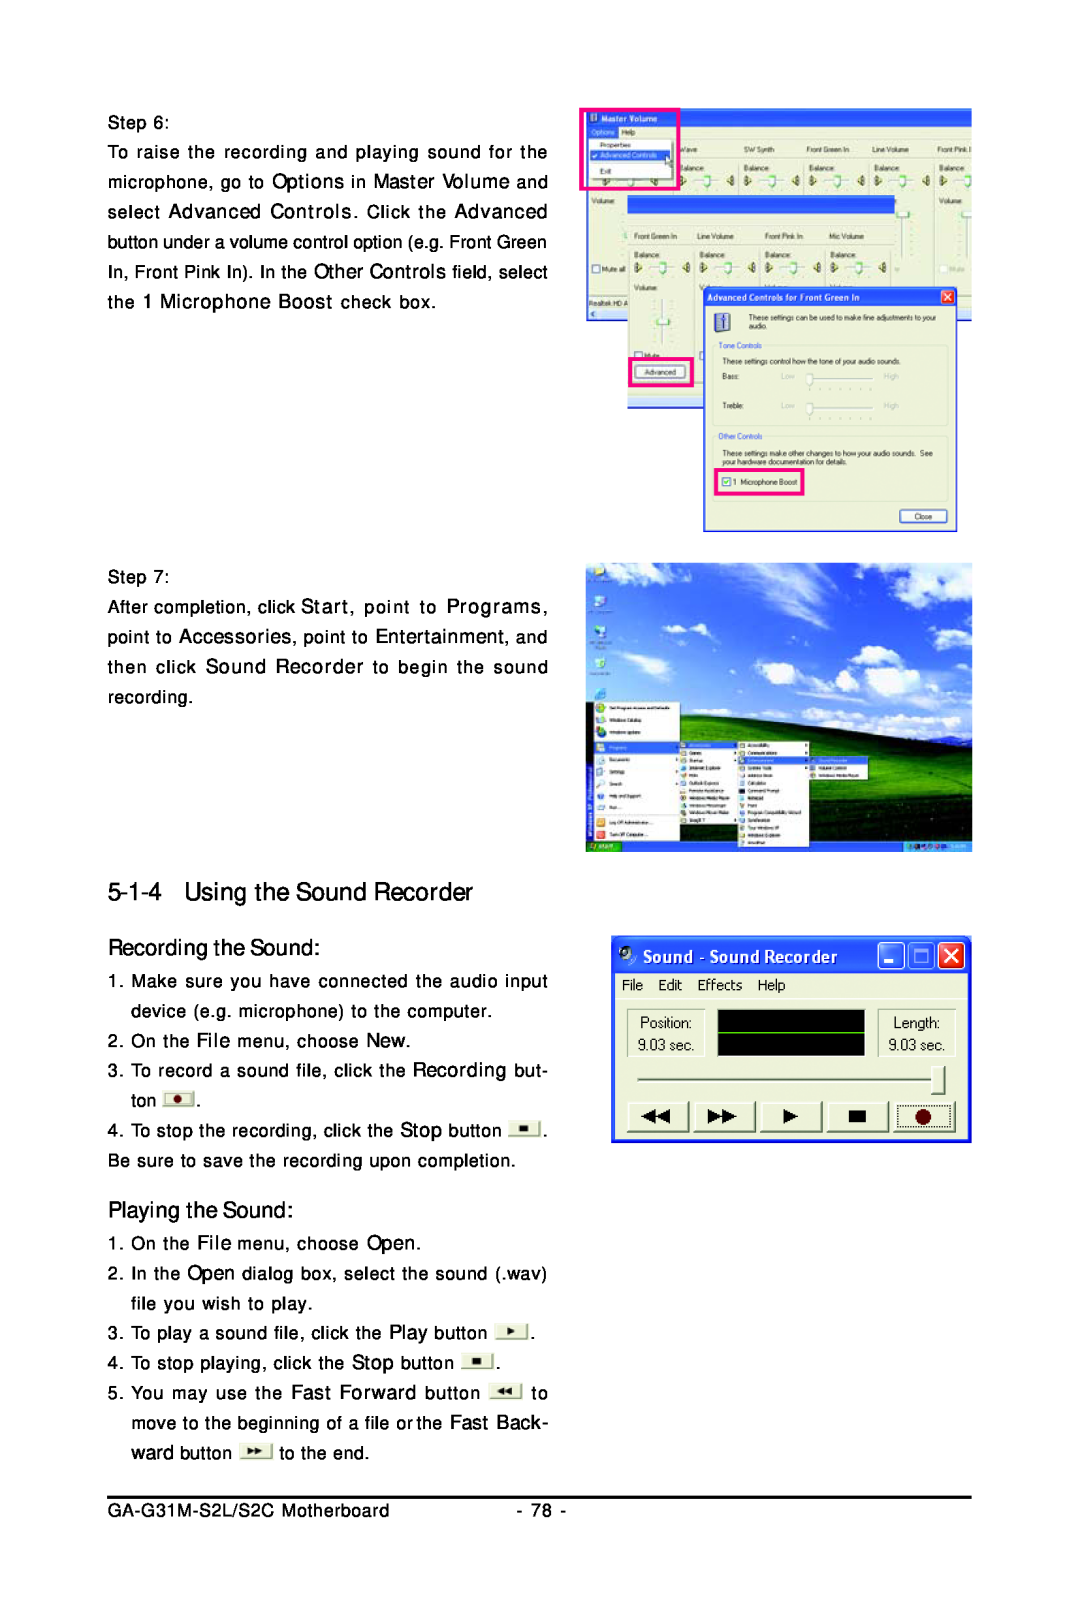 Intel GA-G31M-S2L, GA-G31M-S2C user manual 5-1-4Using the Sound Recorder, Recording the Sound, Playing the Sound 